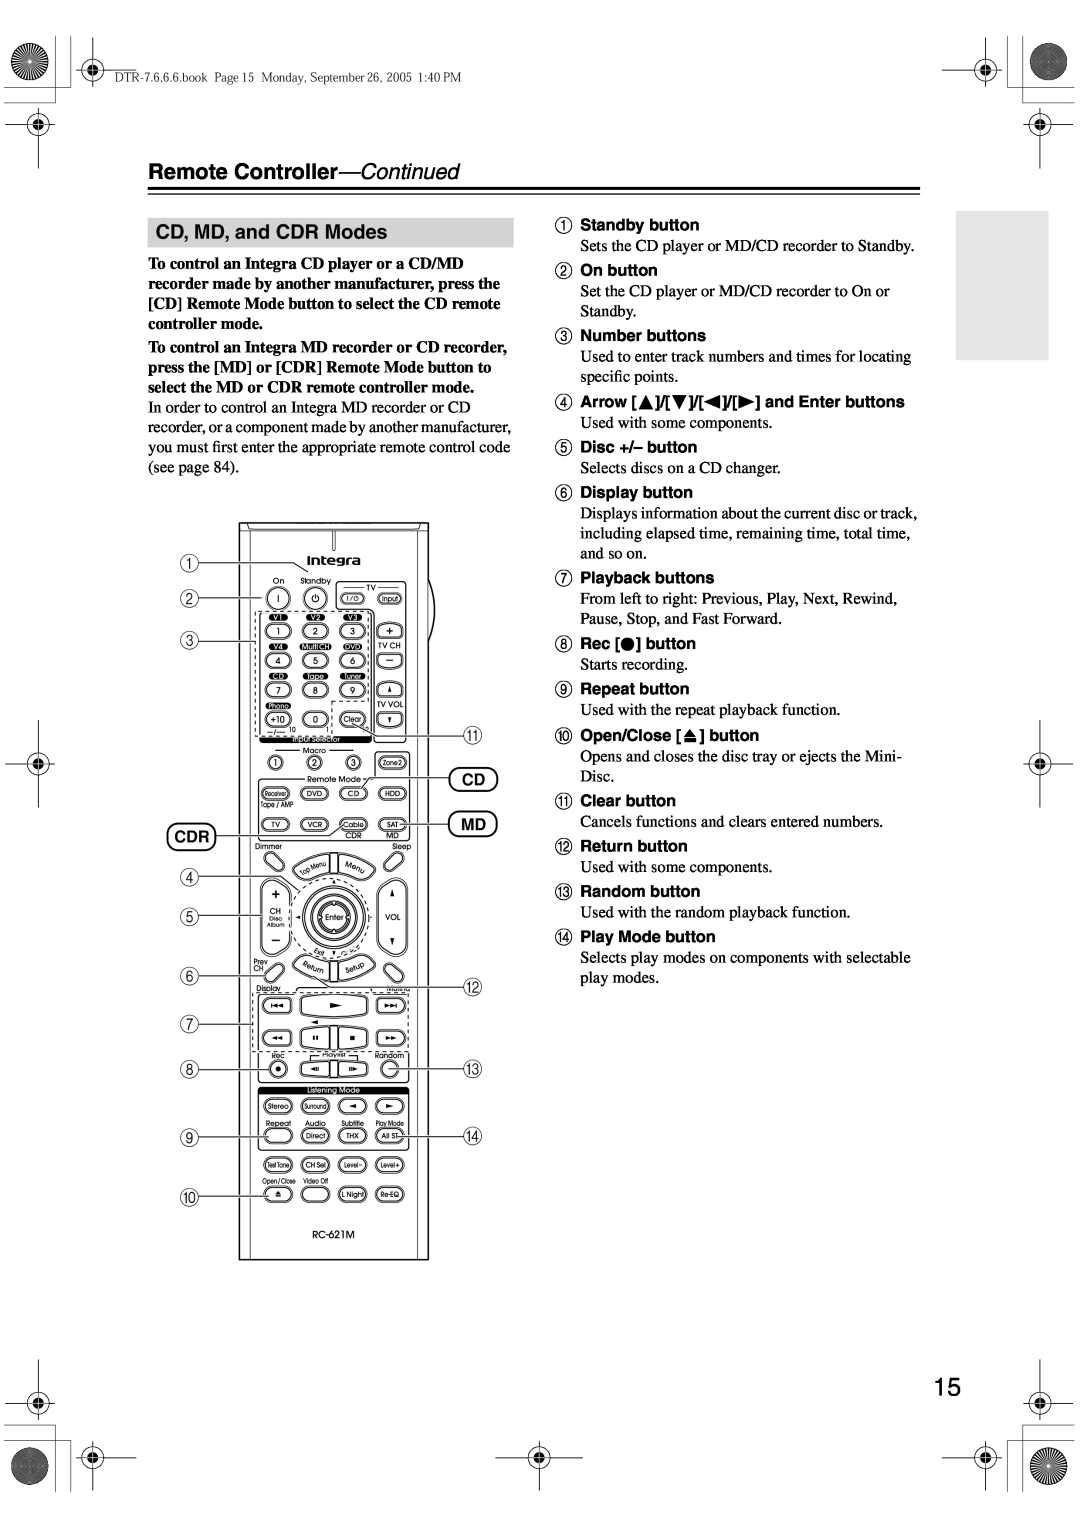 Integra DTR-7.6/6.6 instruction manual CD, MD, and CDR Modes, Remote Controller-Continued 